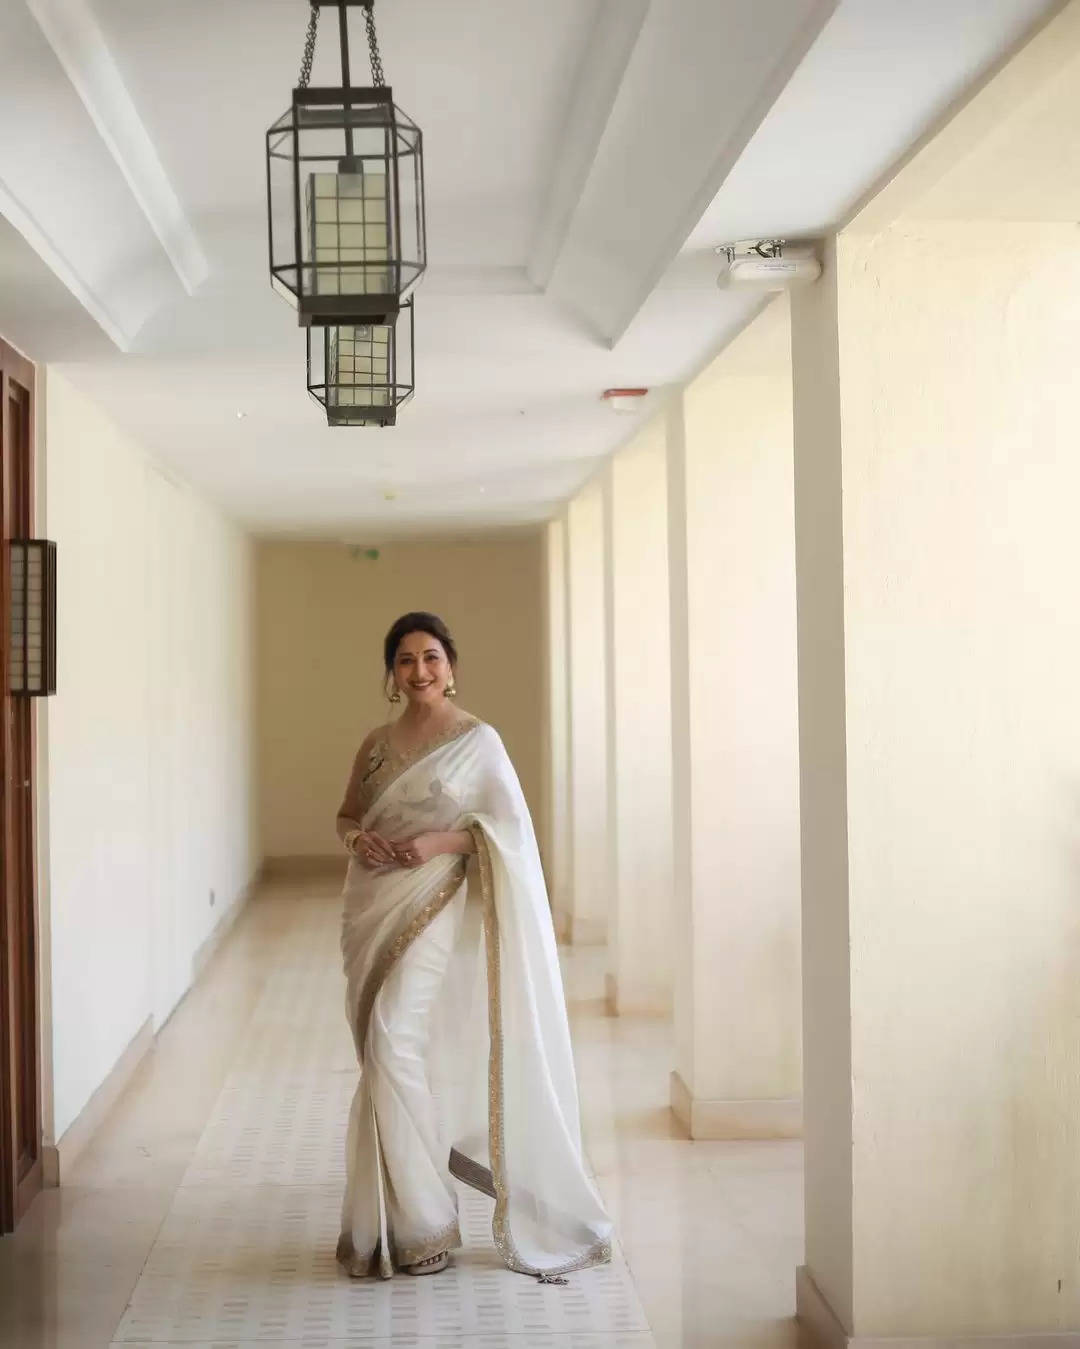 Photos: These Saree Looks Of Madhuri Dixit Are Sight To Behold, Check PICS